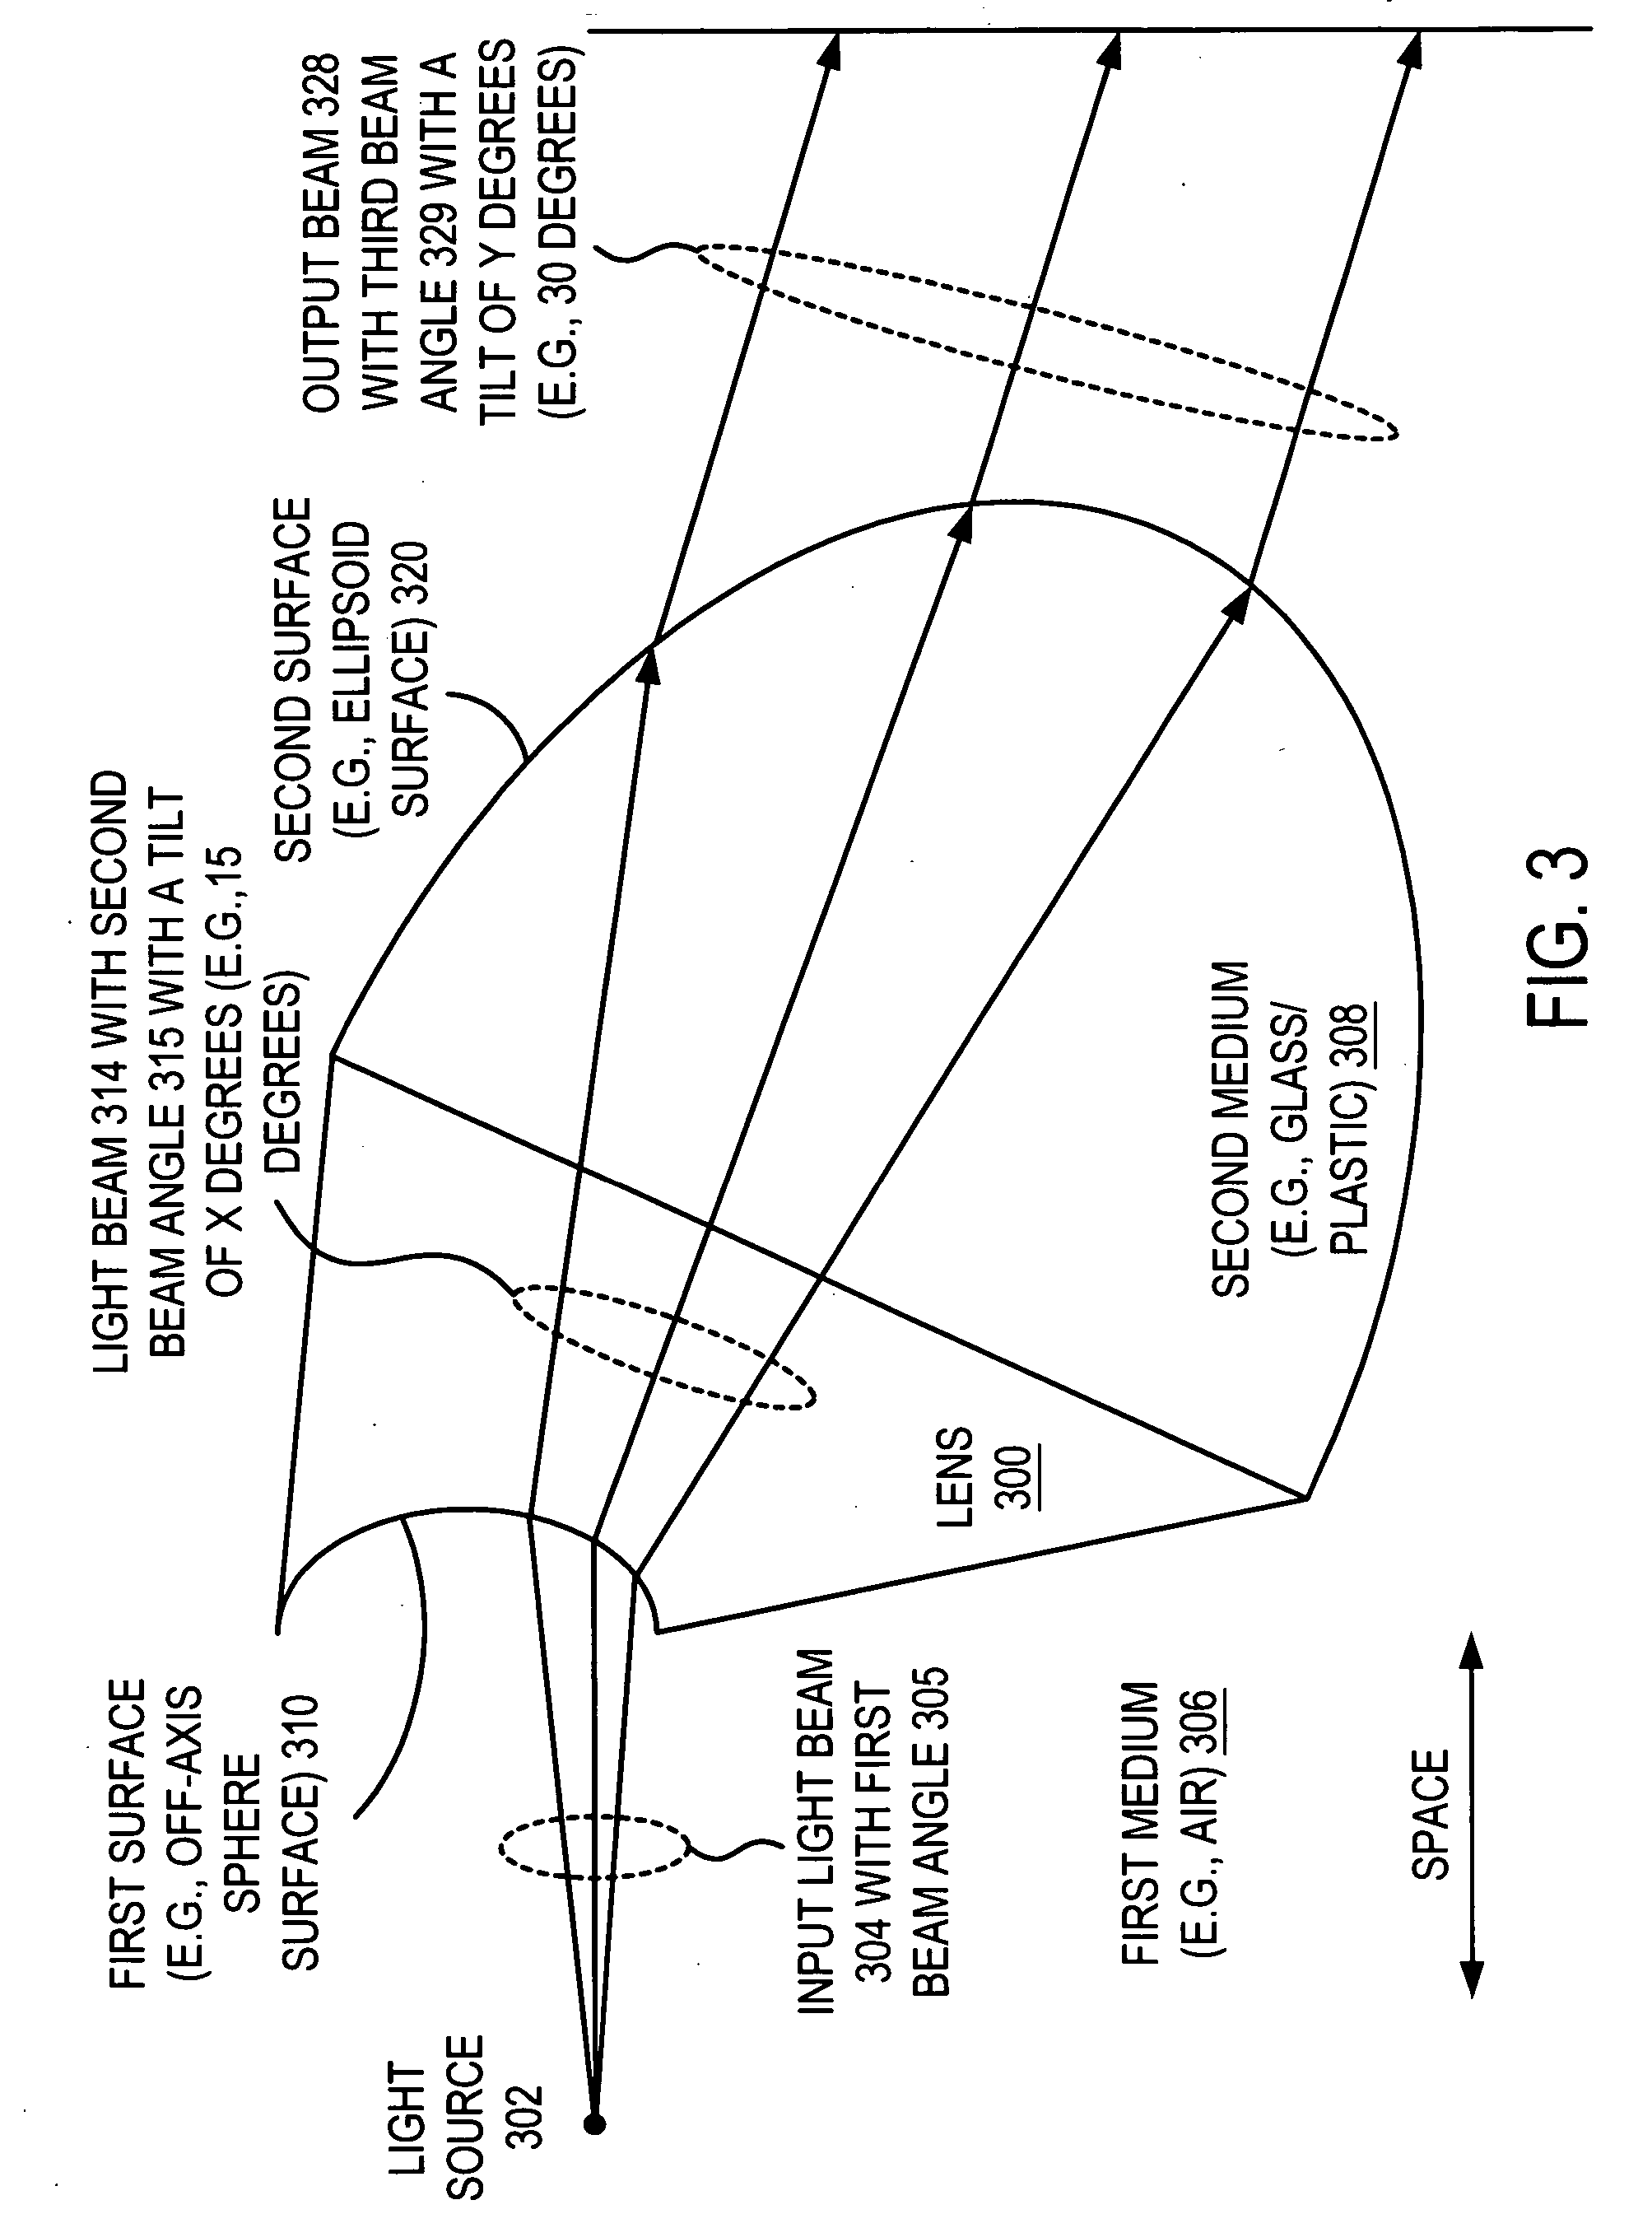 Collimating lens structures